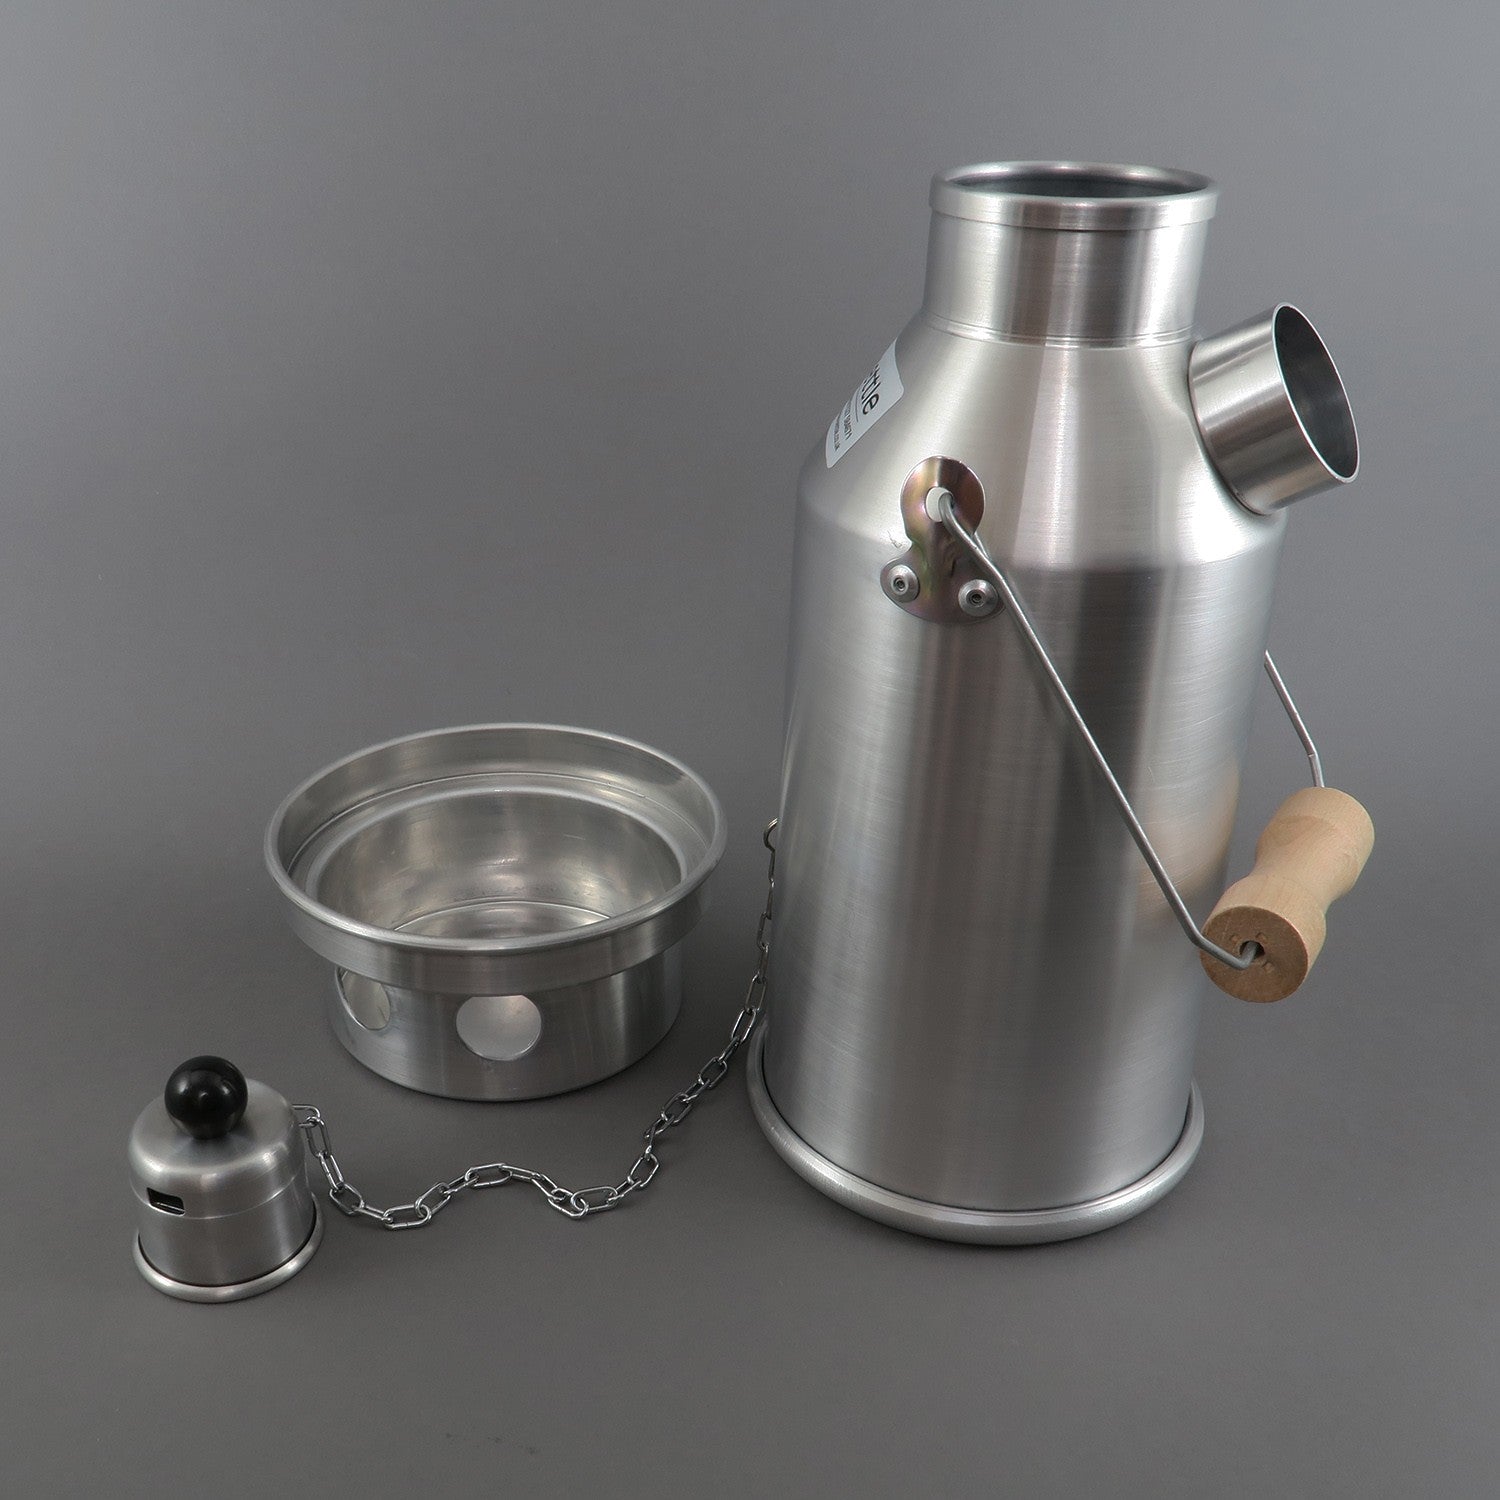 Ghillie Kettle Camping Kelly Kettles